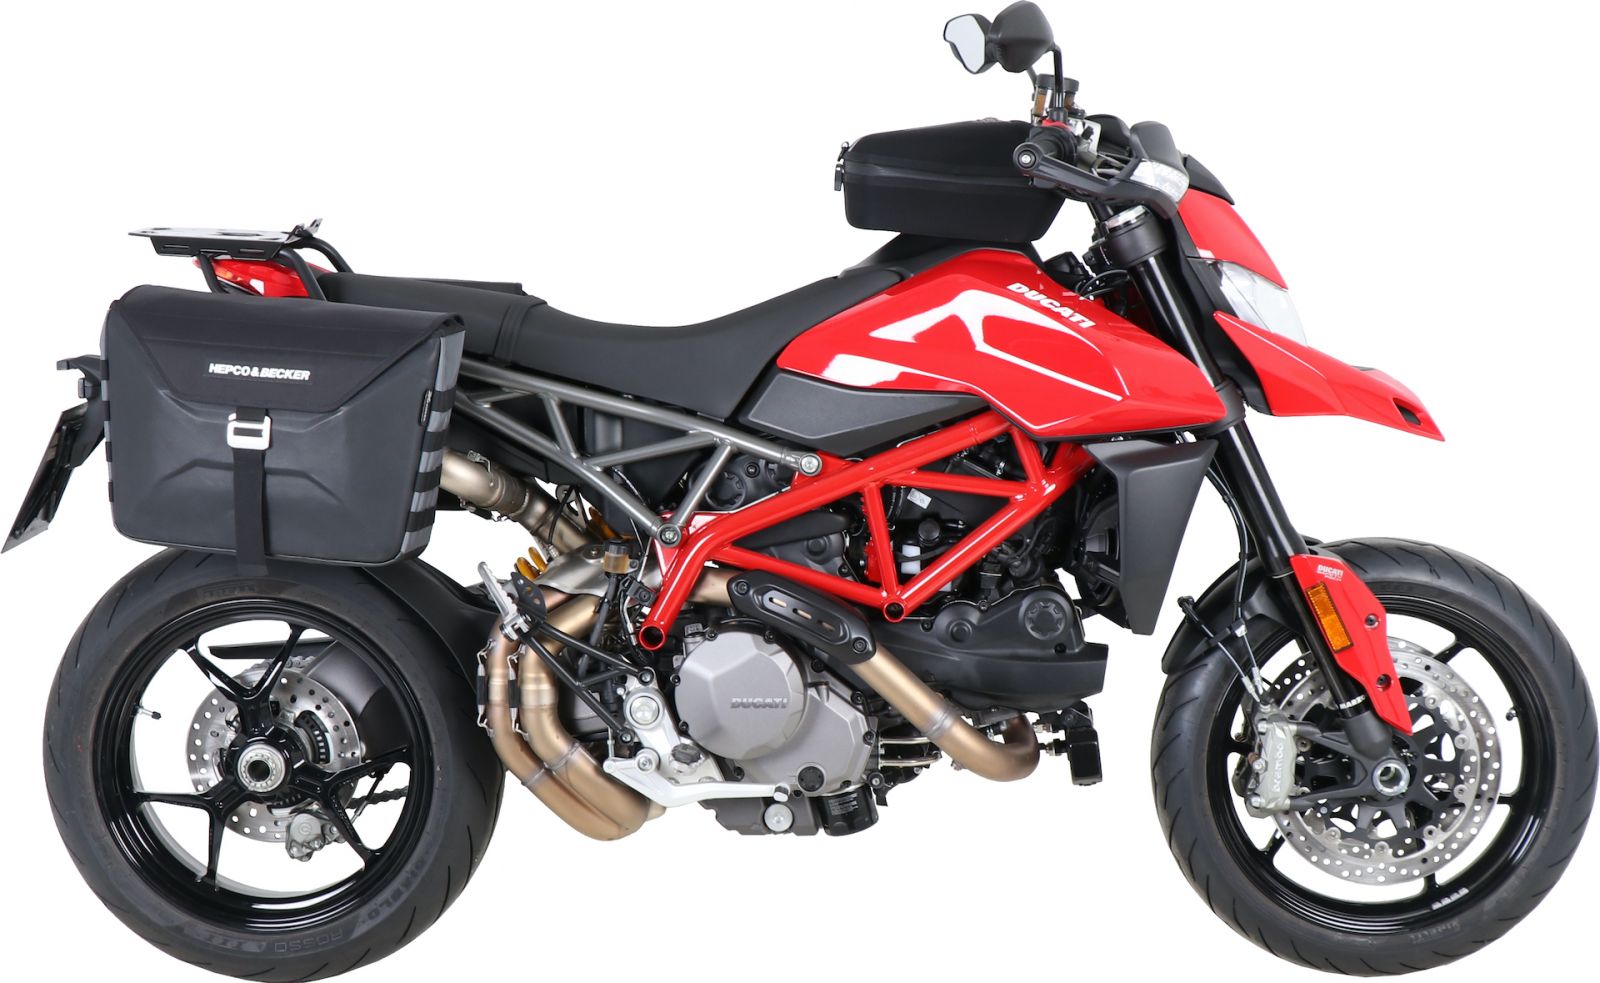 Ducati Hypermotard 950 SP premium quality motorcycle accessories & luggage Made in Germany, Hepco&Becker Enduristan Roxspeed by Motorcycle Adventure Products